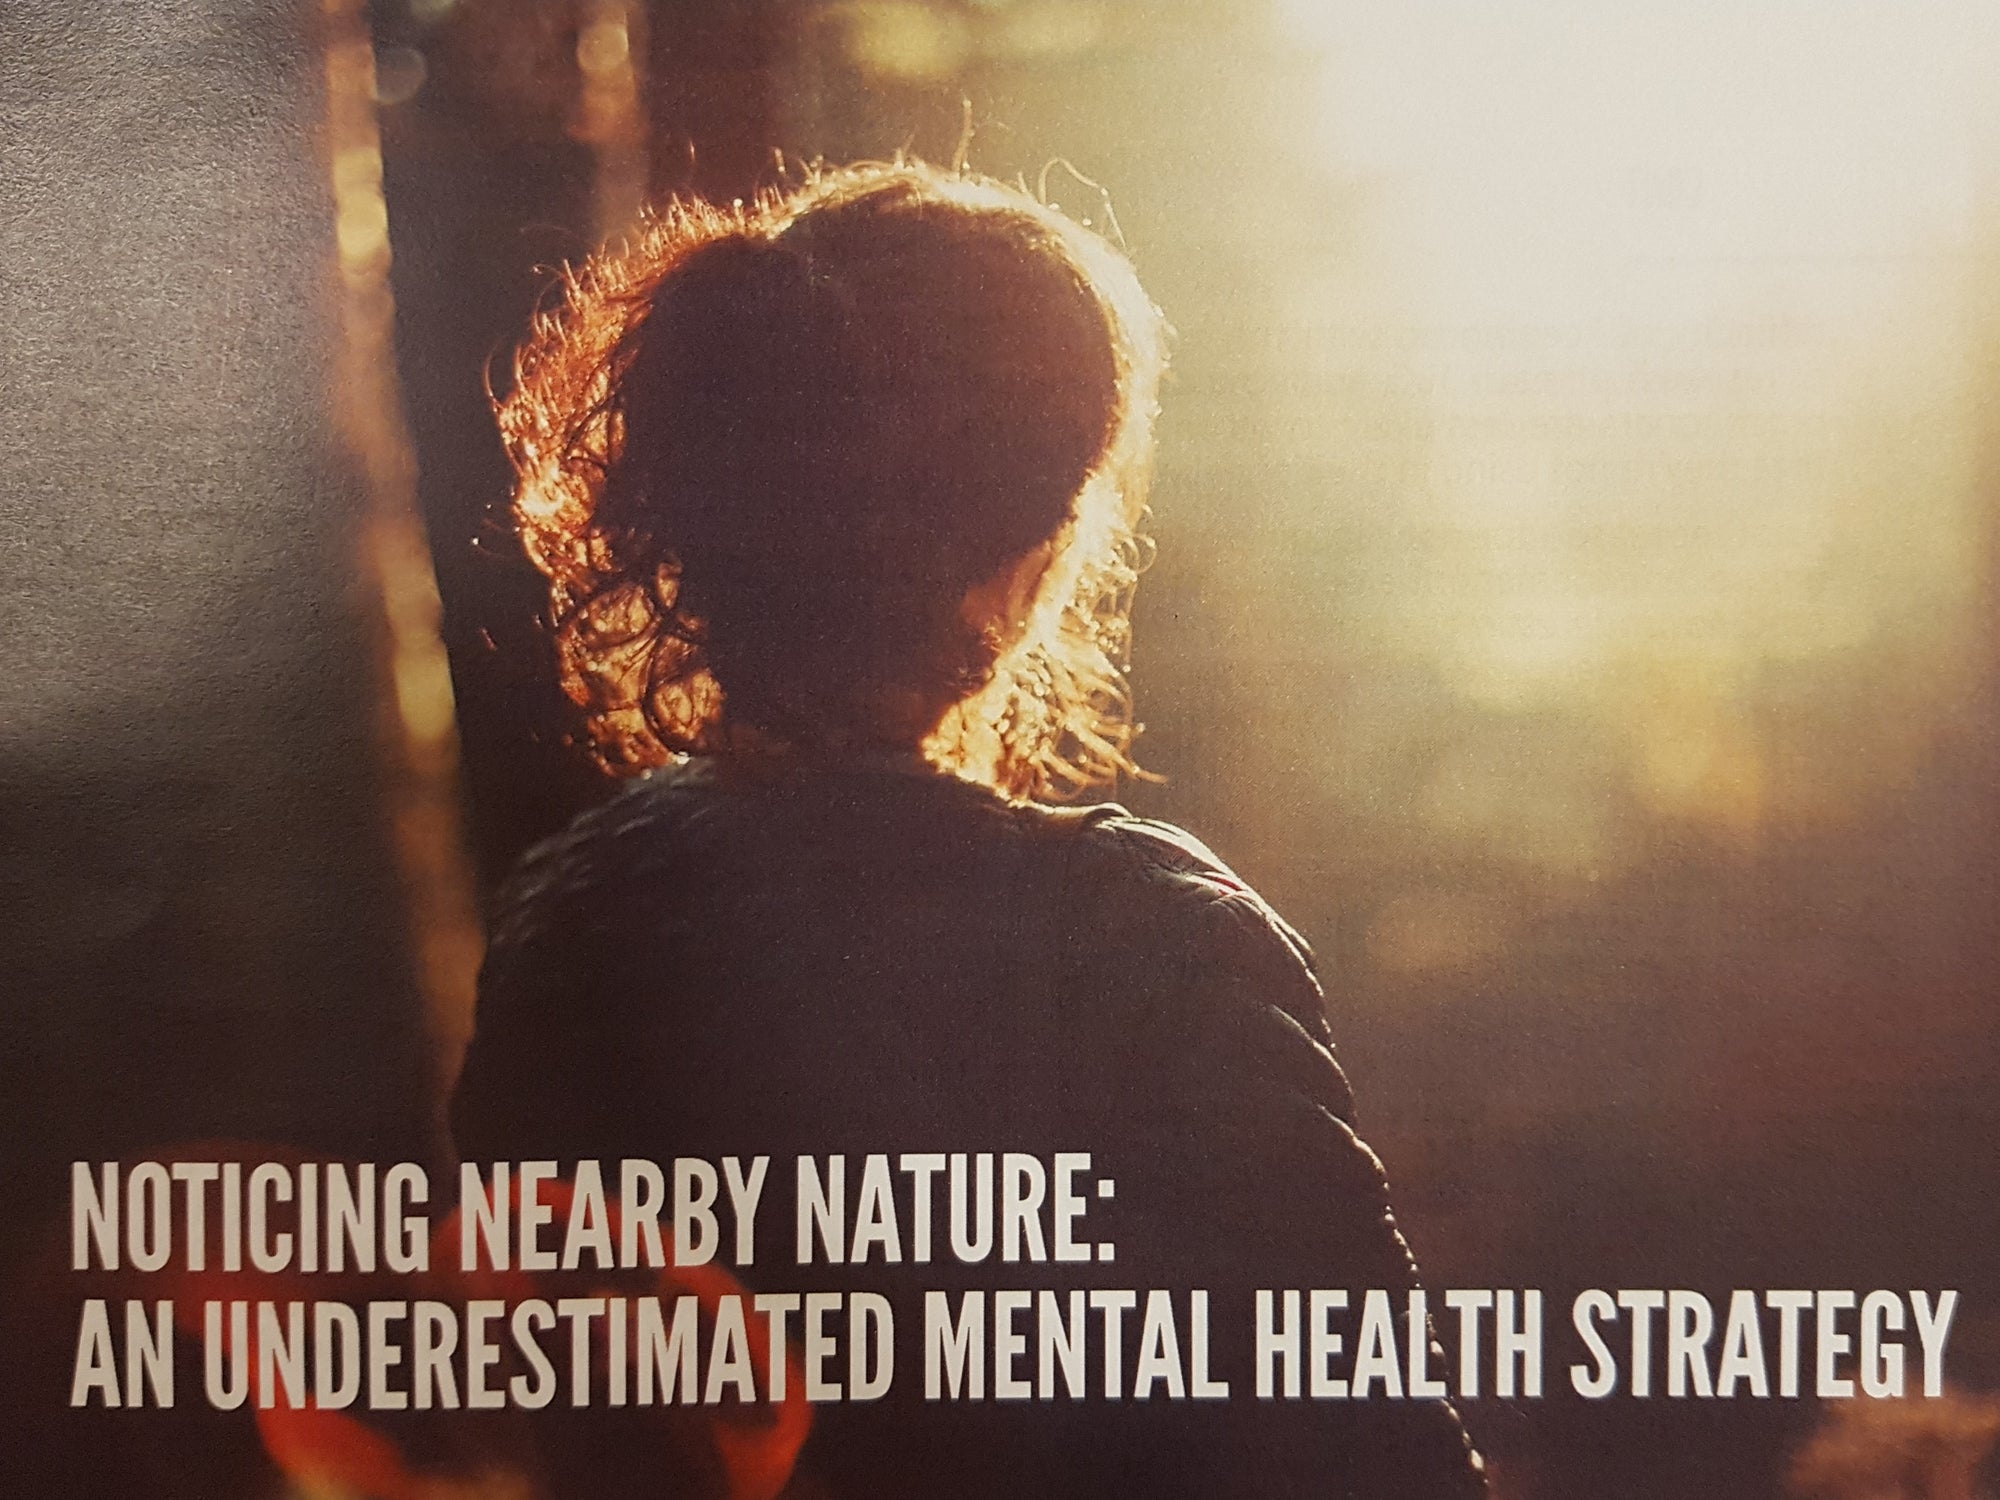 Noticing Nearby Nature: An Underestimated Mental Health Strategy